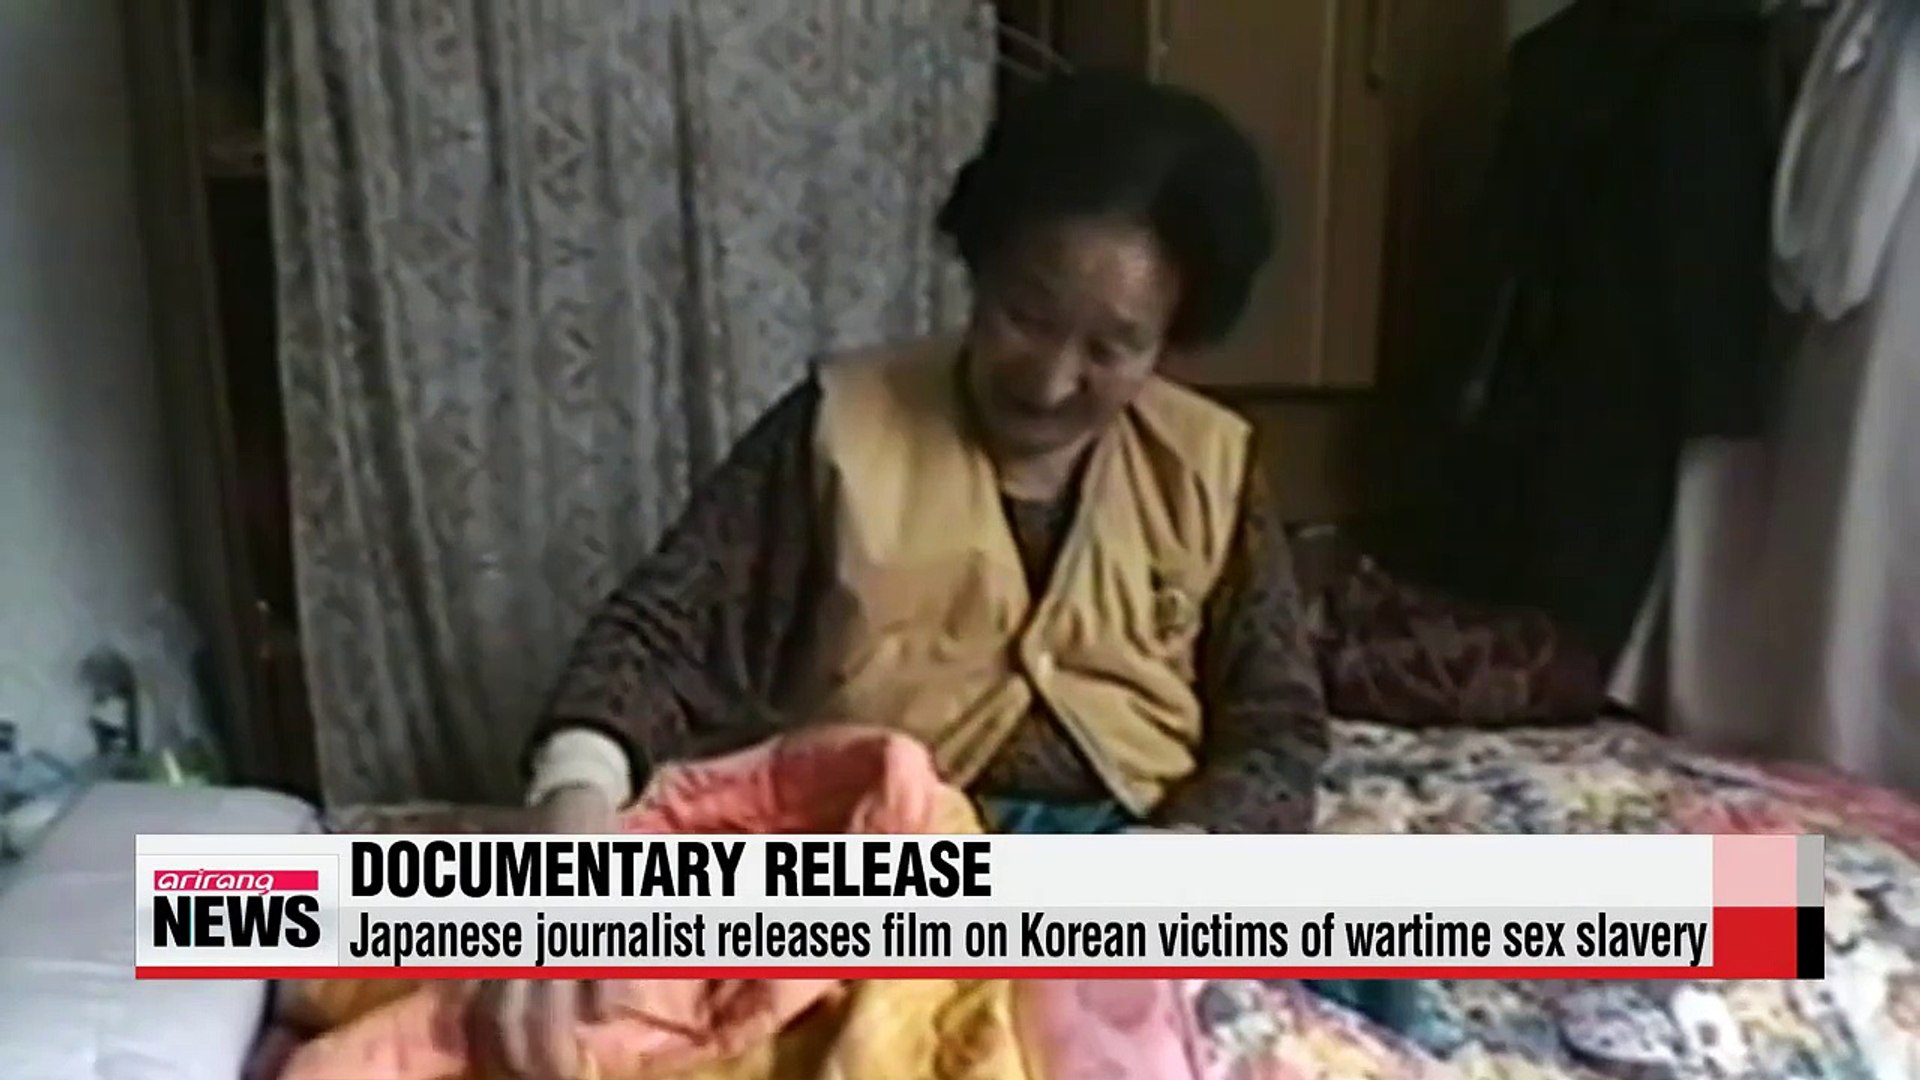 Japanese journalist releases film on Korean victims of wartime sex slavery  pic